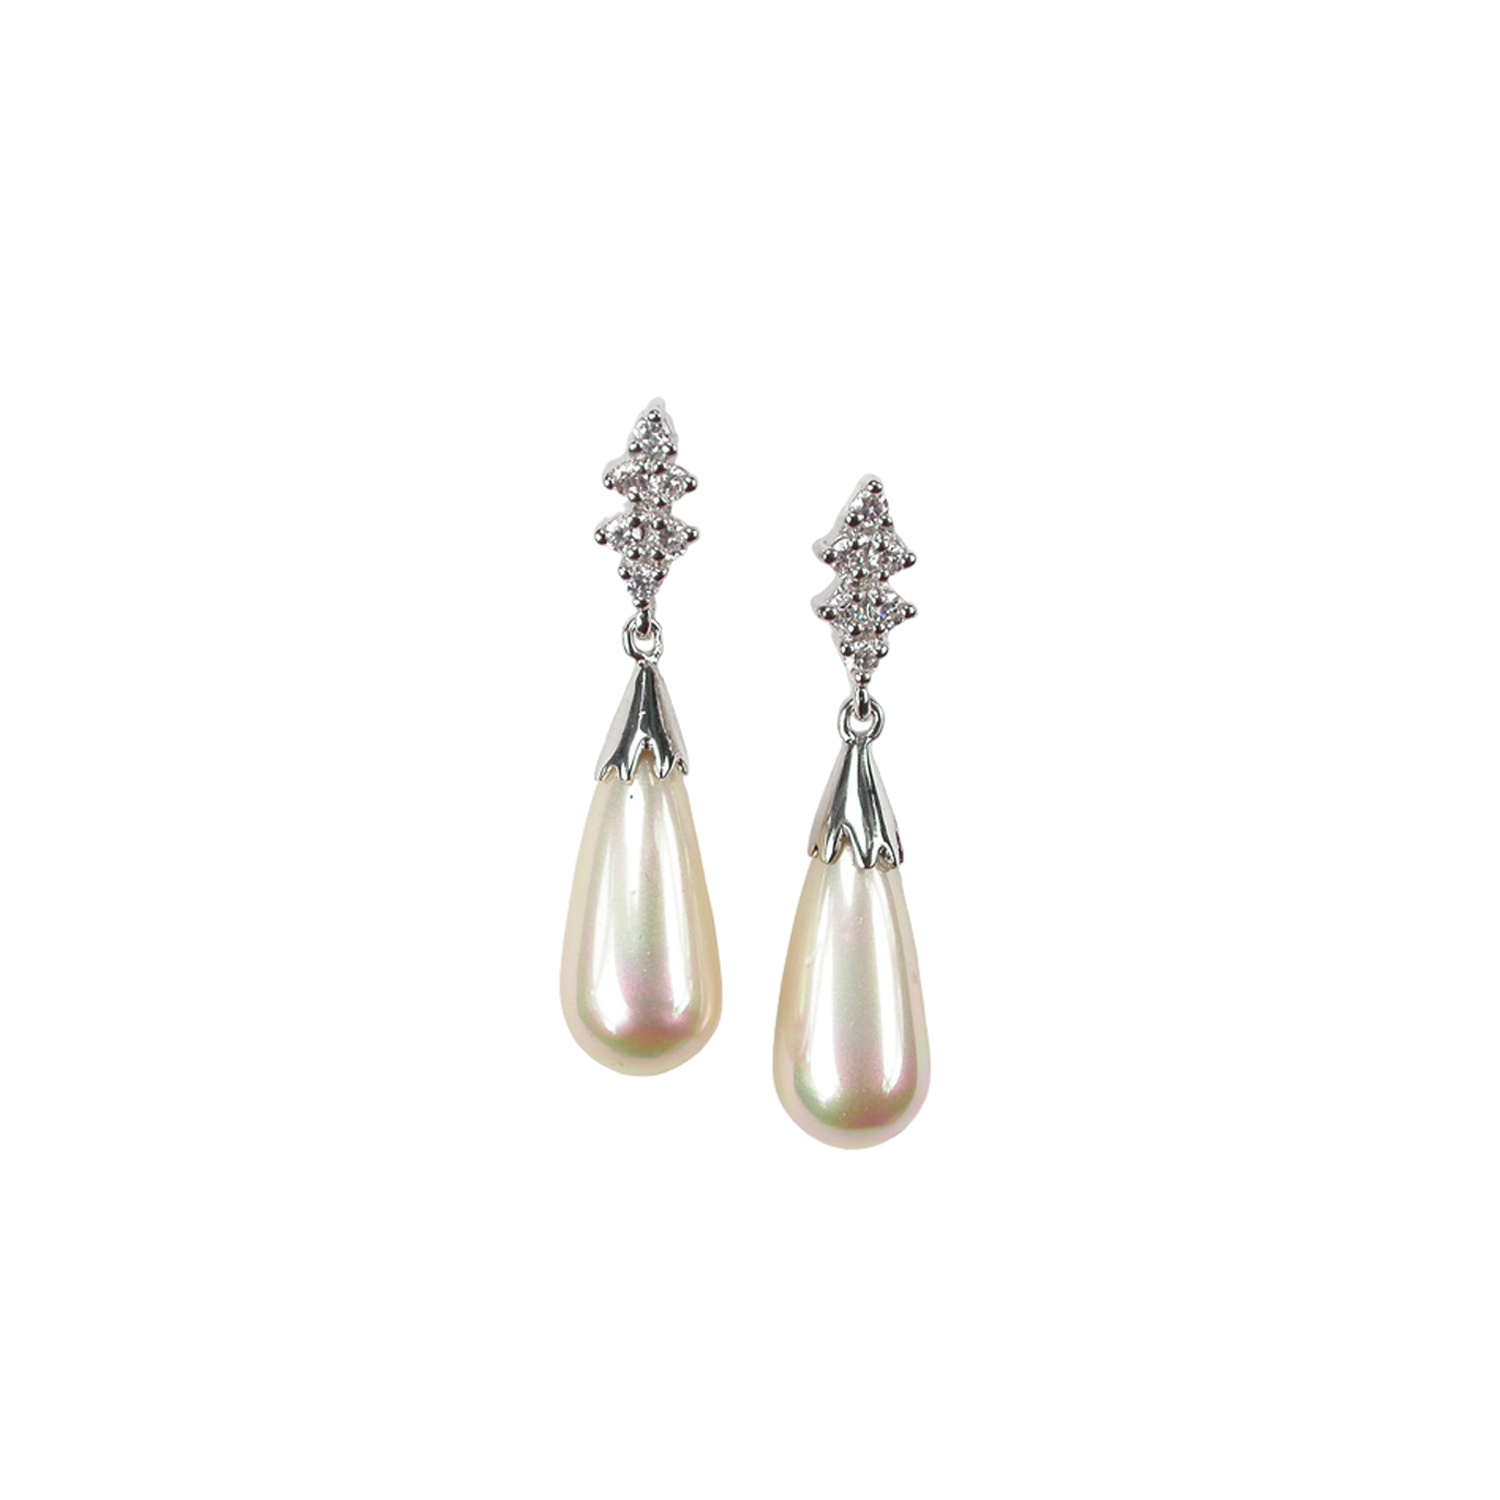 Silver Earrings with Zirconium and Pearls